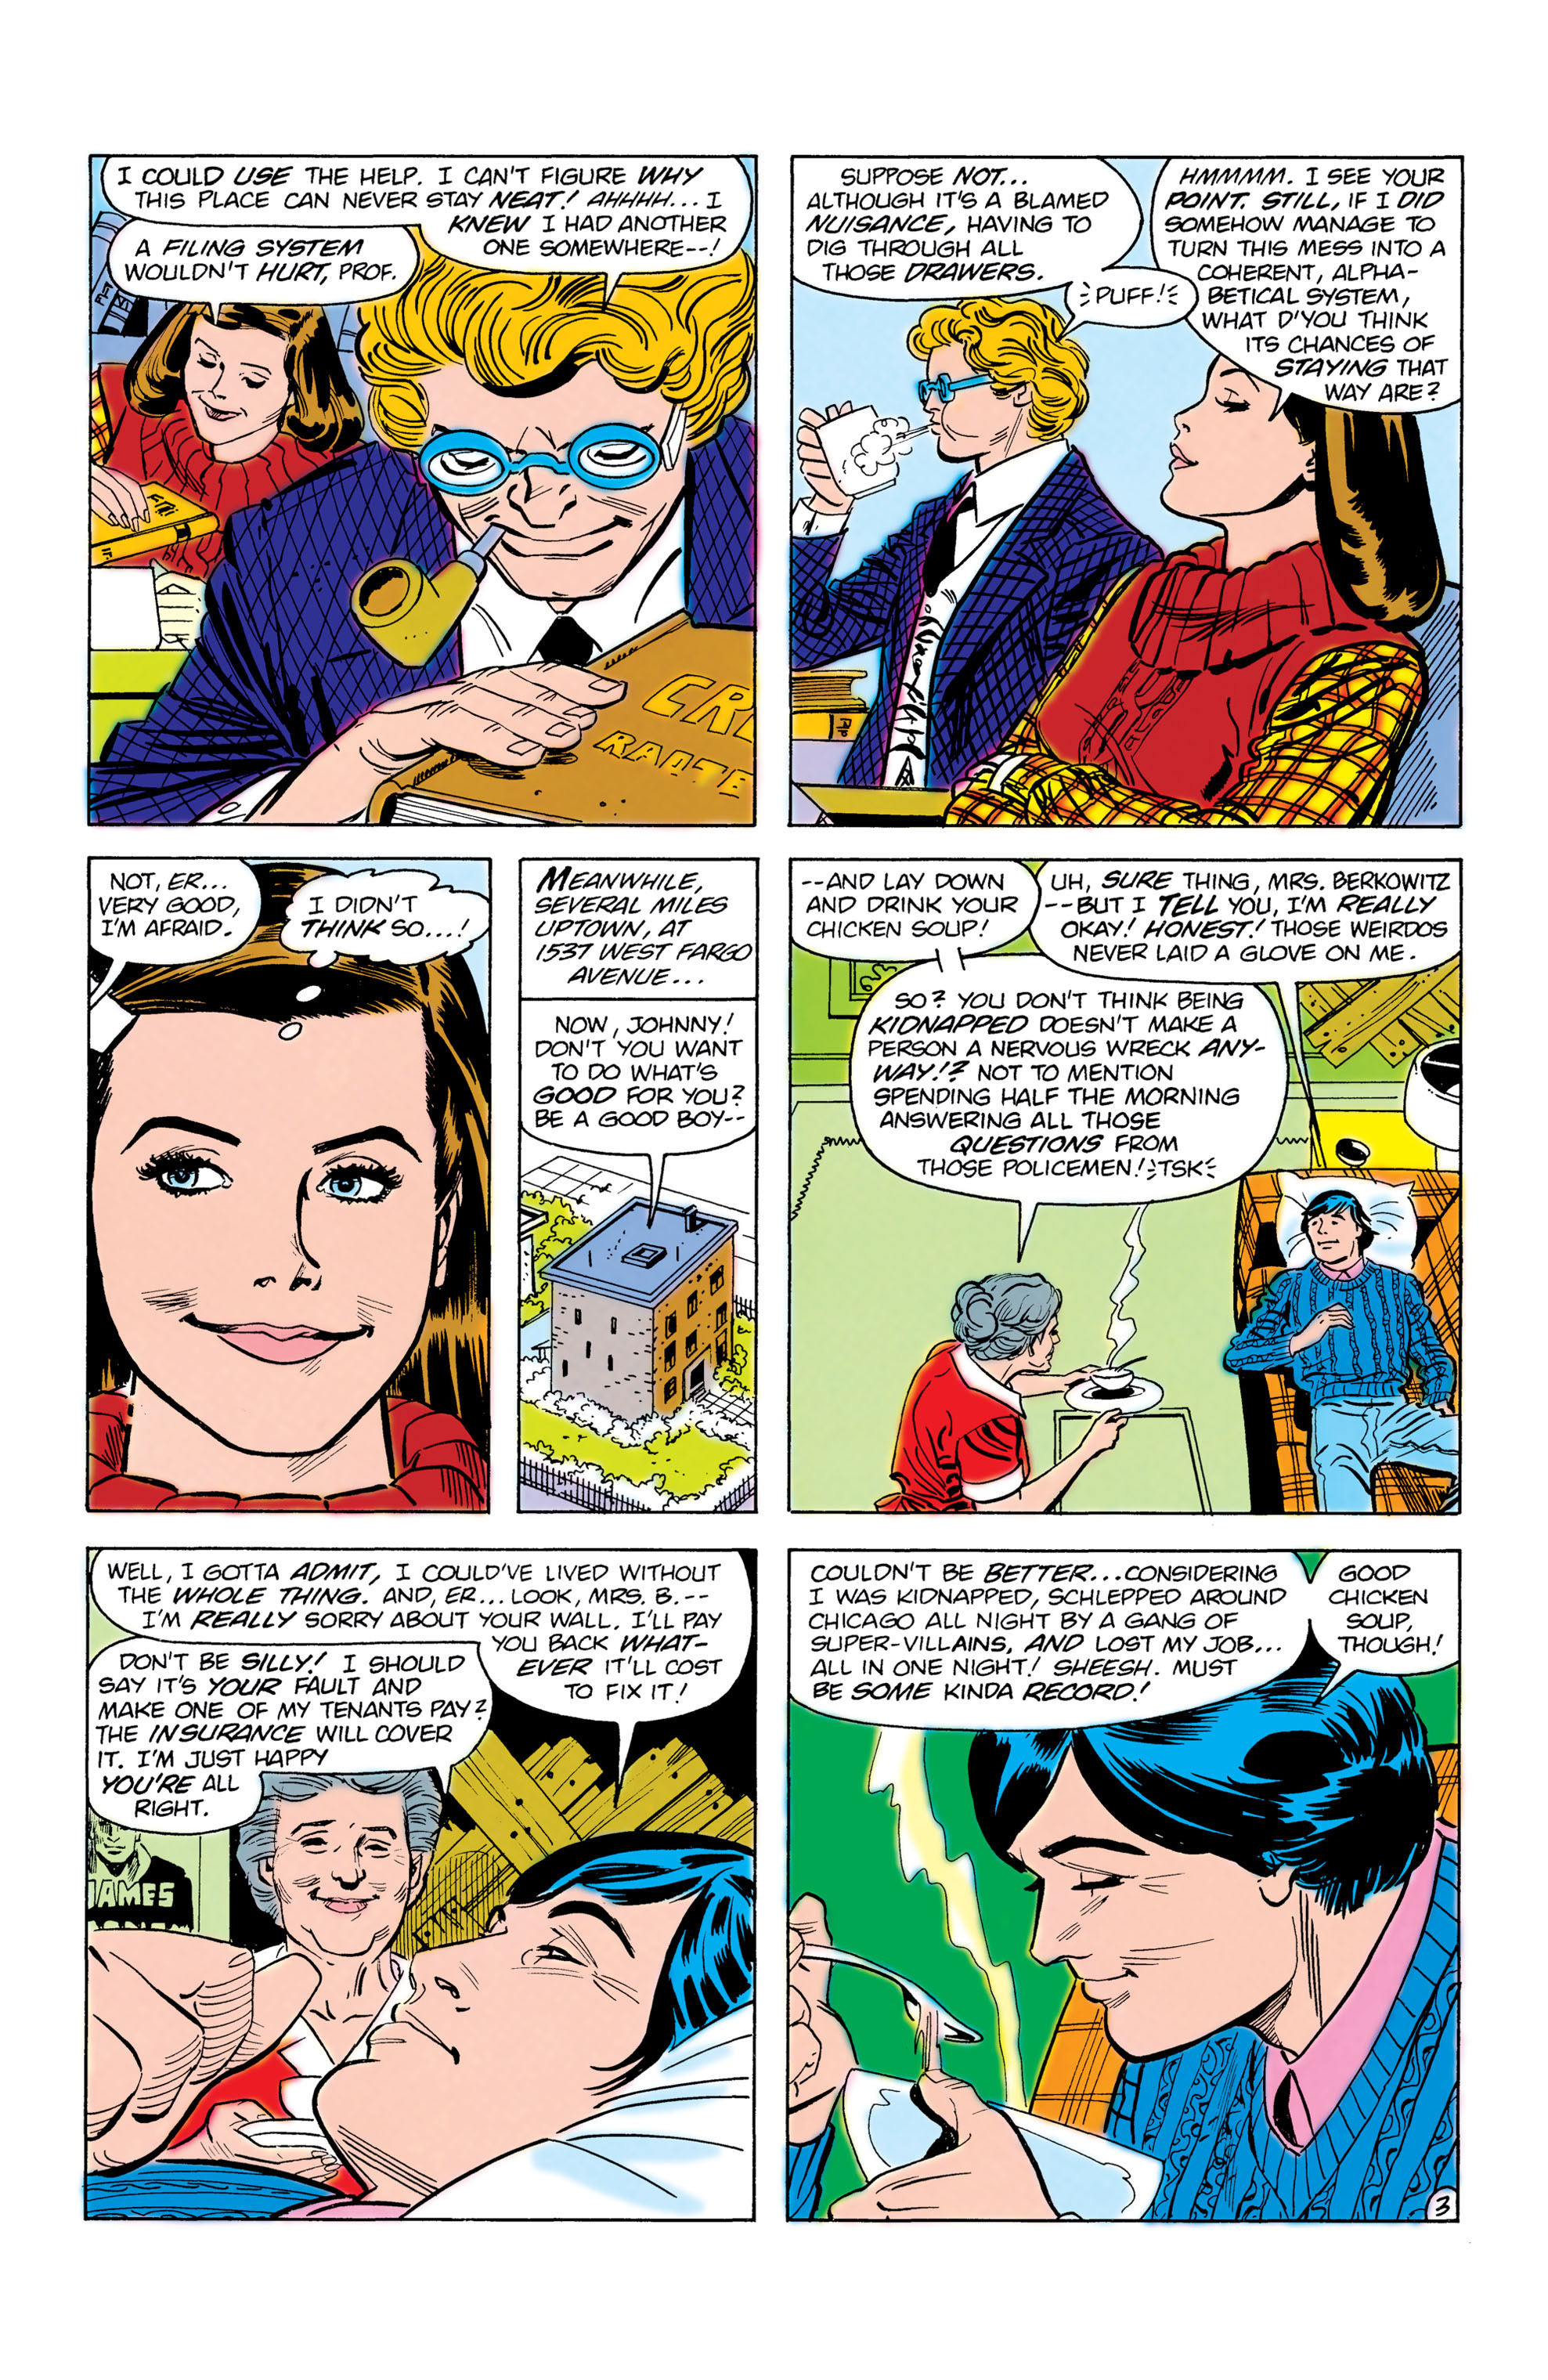 Supergirl (1982) 6 Page 3